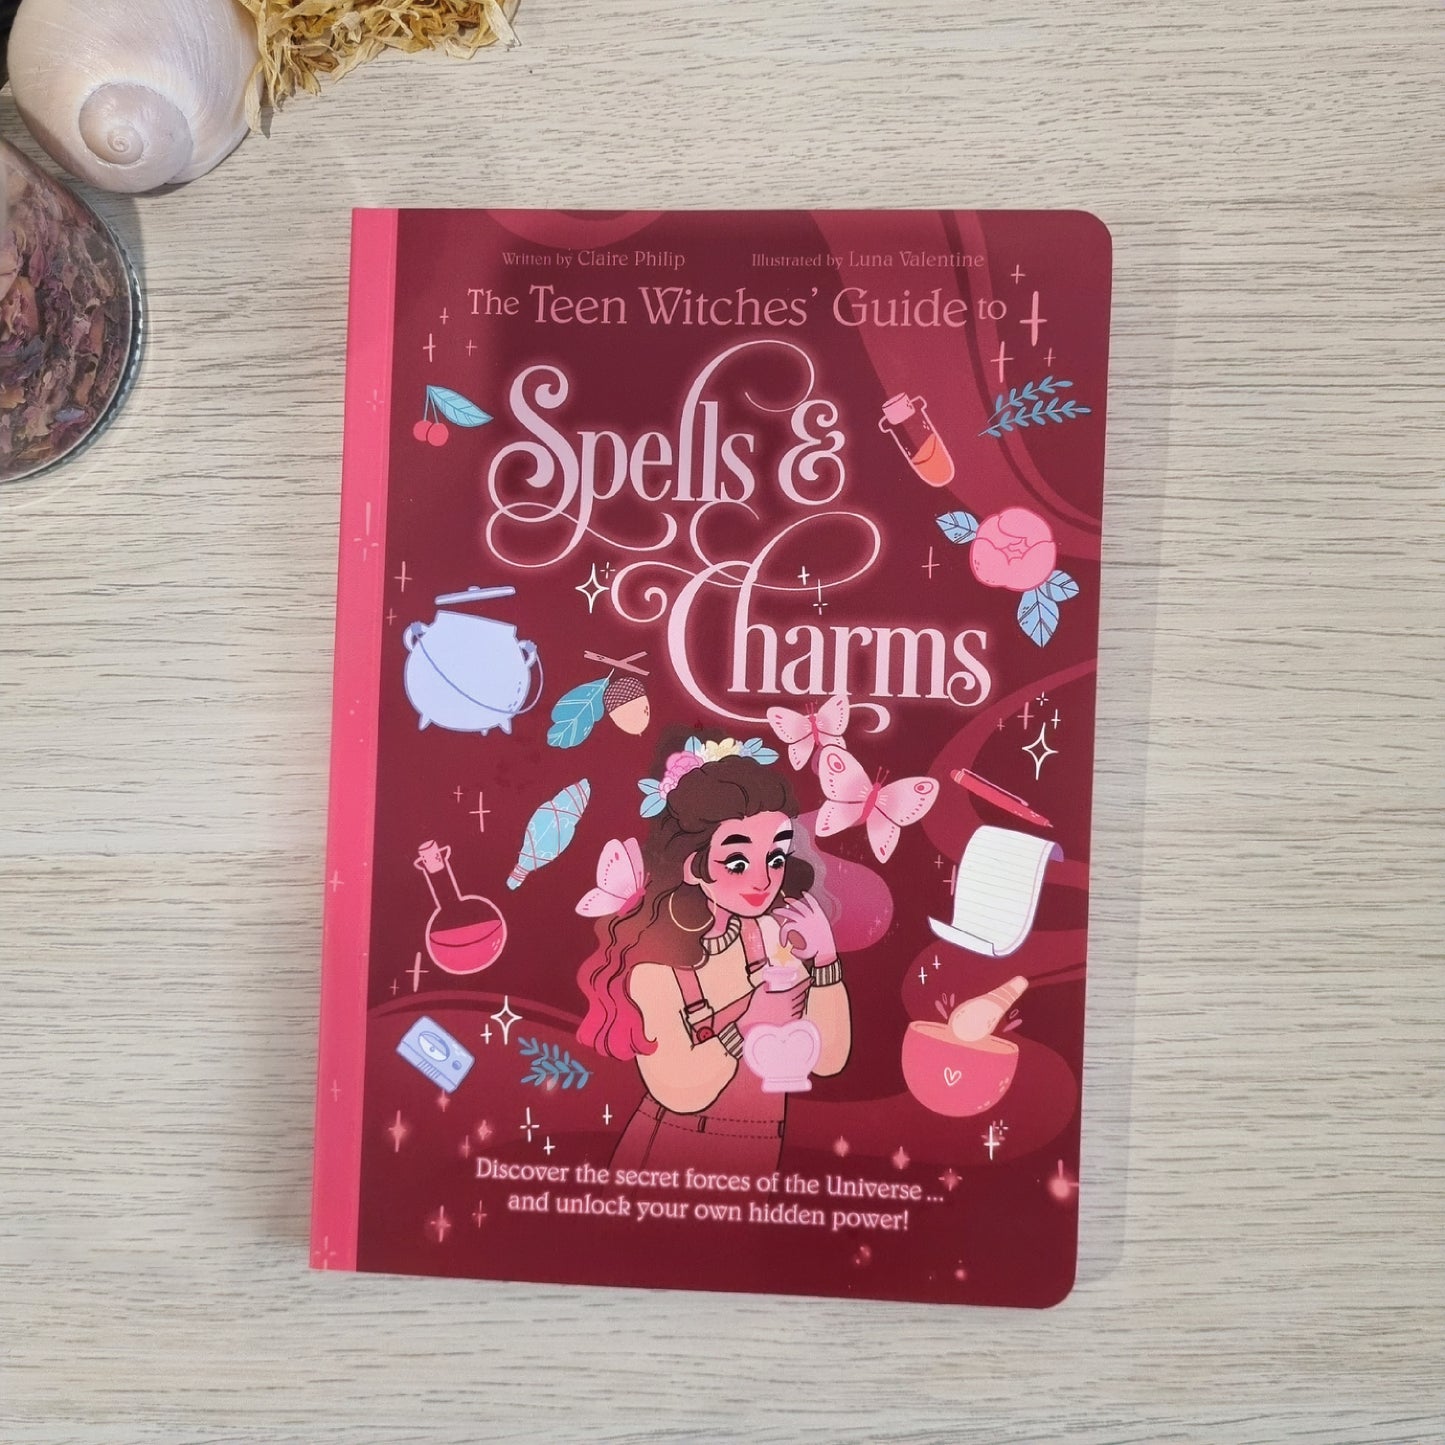 The Teen Witches' Guide to Spells & Charms